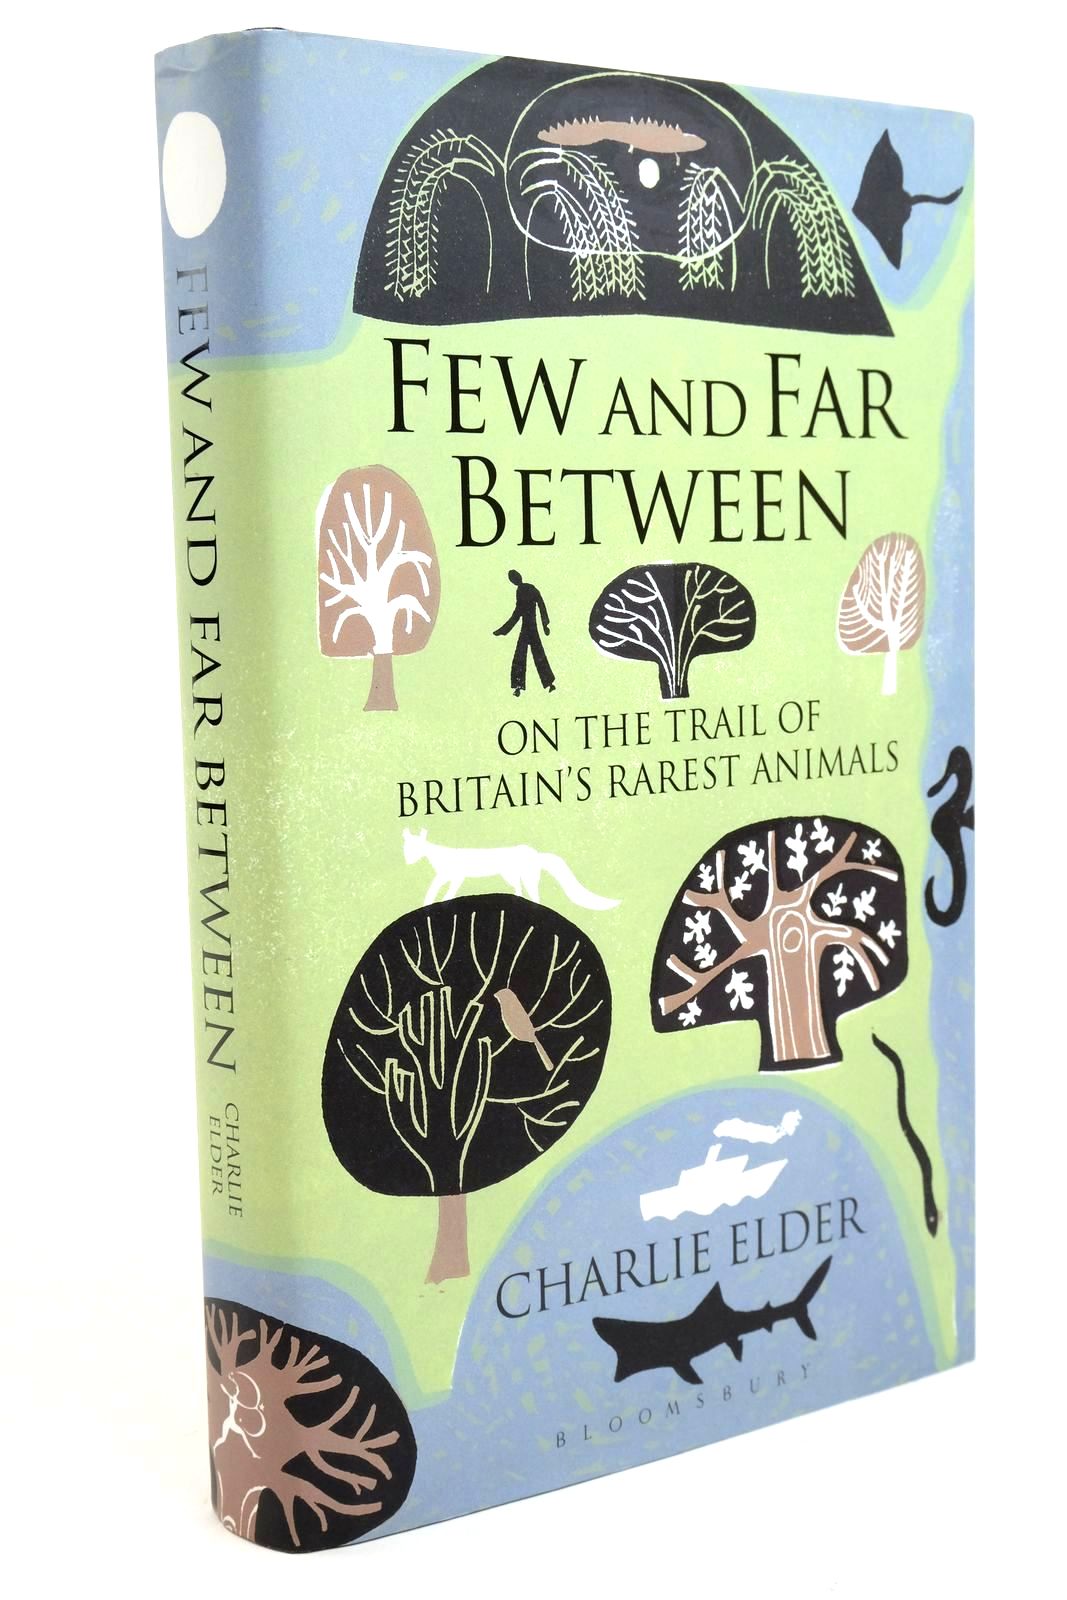 Photo of FEW AND FAR BETWEEN written by Elder, Charlie published by Bloomsbury Publishing Plc (STOCK CODE: 1322291)  for sale by Stella & Rose's Books